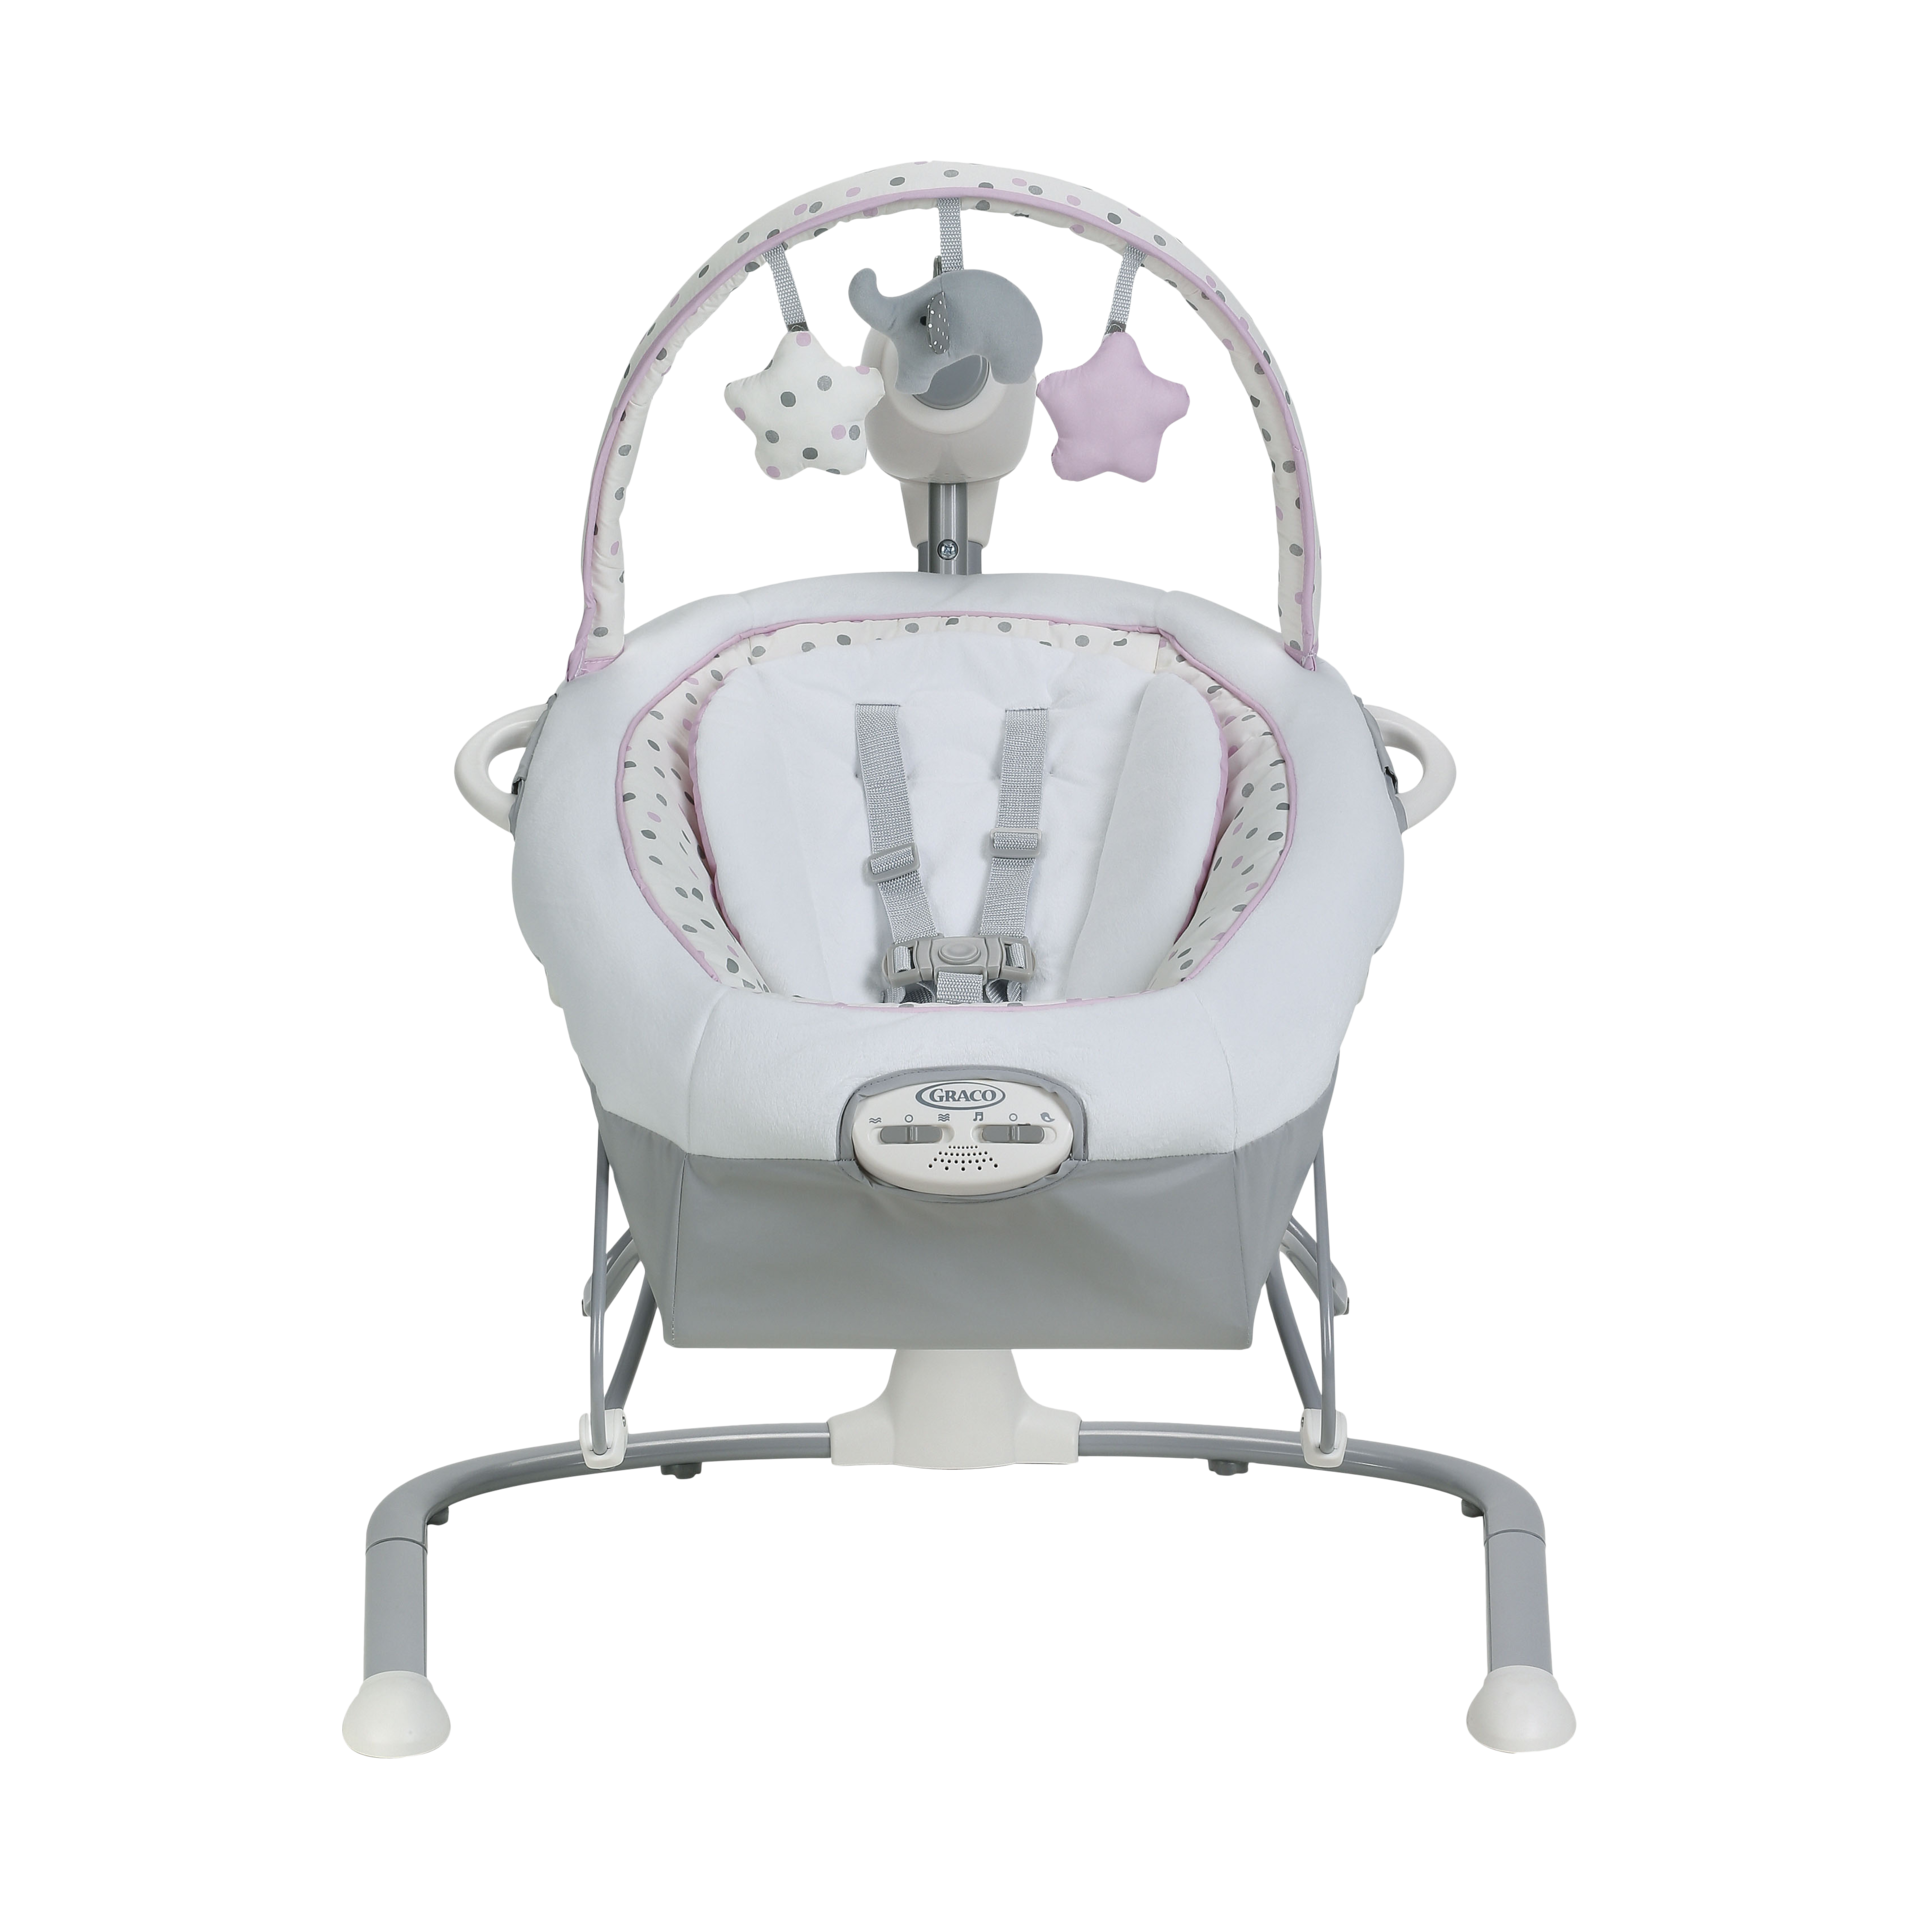 graco duet swing weight limit